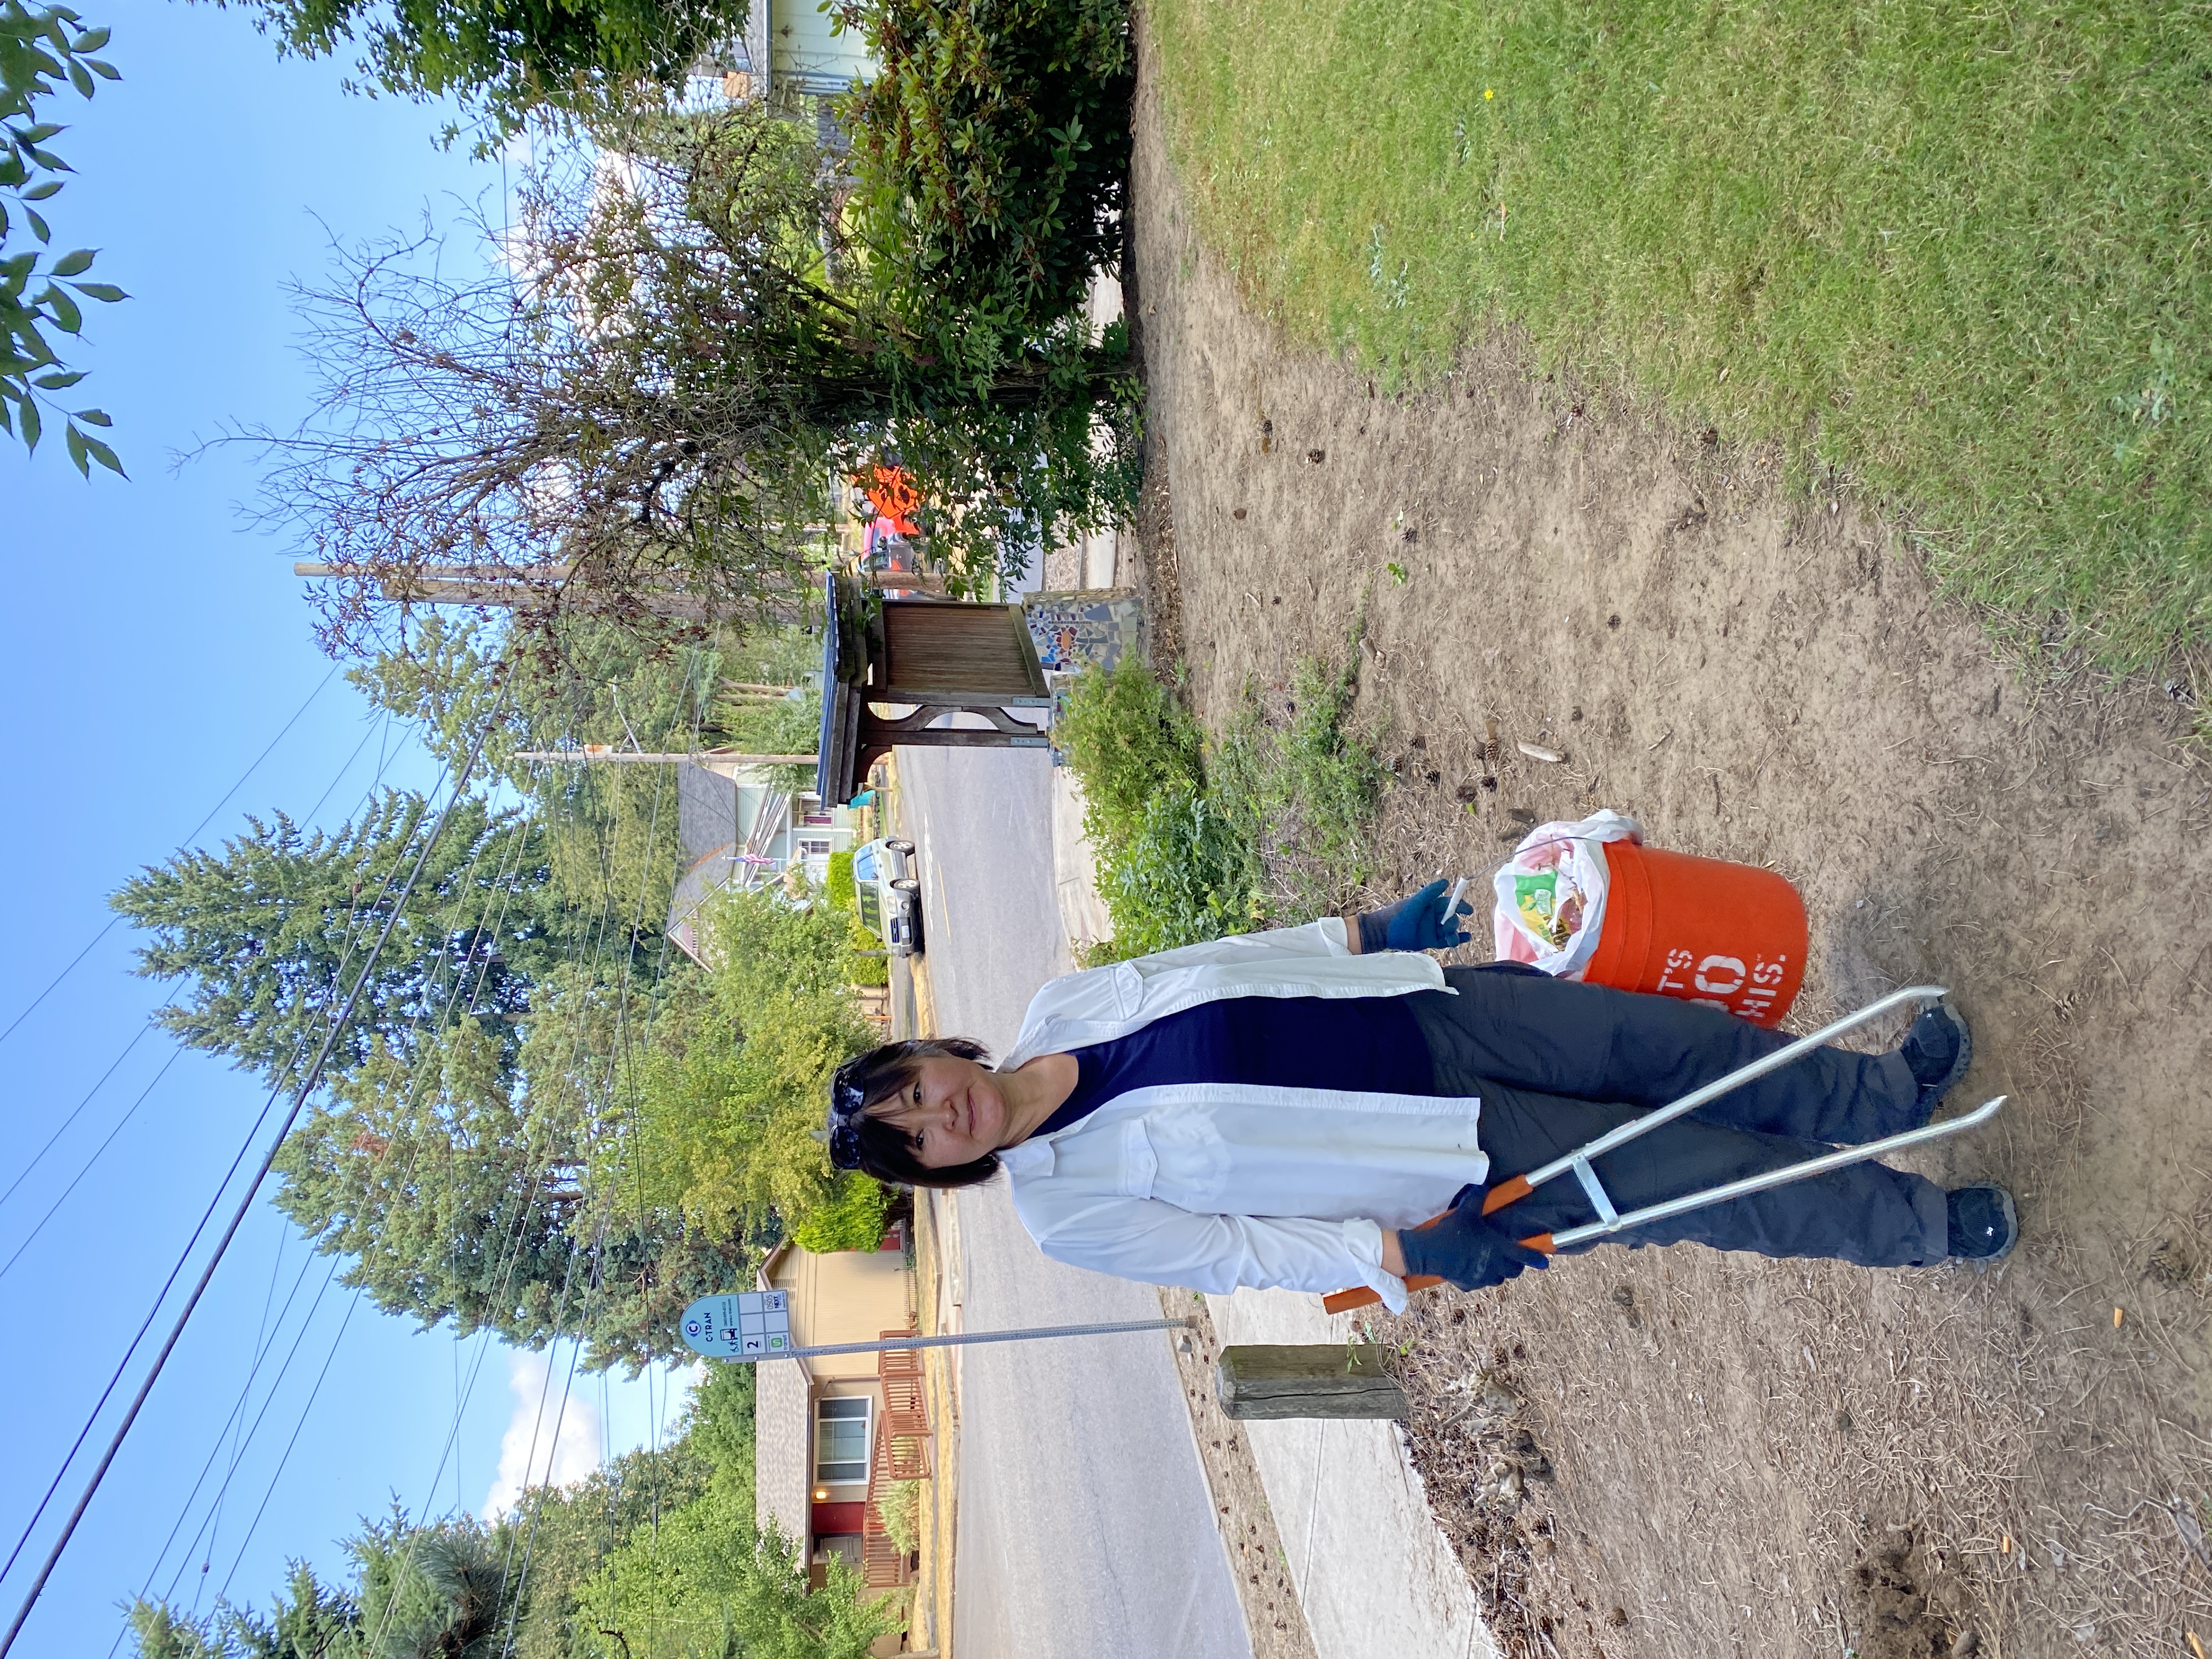 volunteer poses with litter grabber and bucket in park